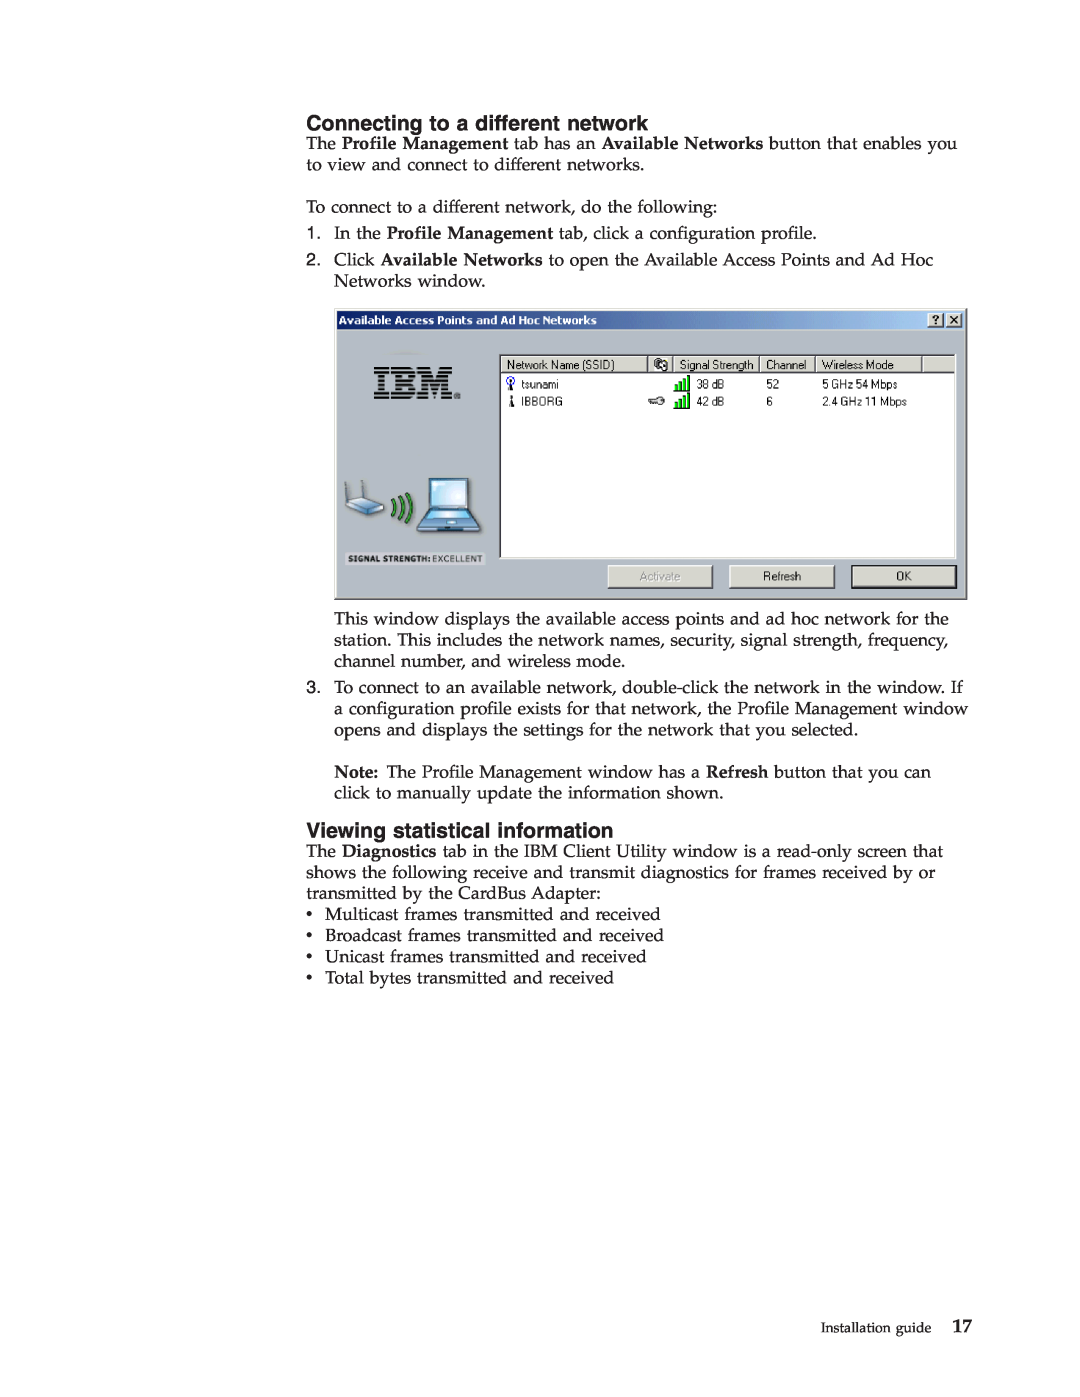 Trust Computer Products IBM 802.11a/b/g Wireless CardBus Adapter manual Connecting to a different network 